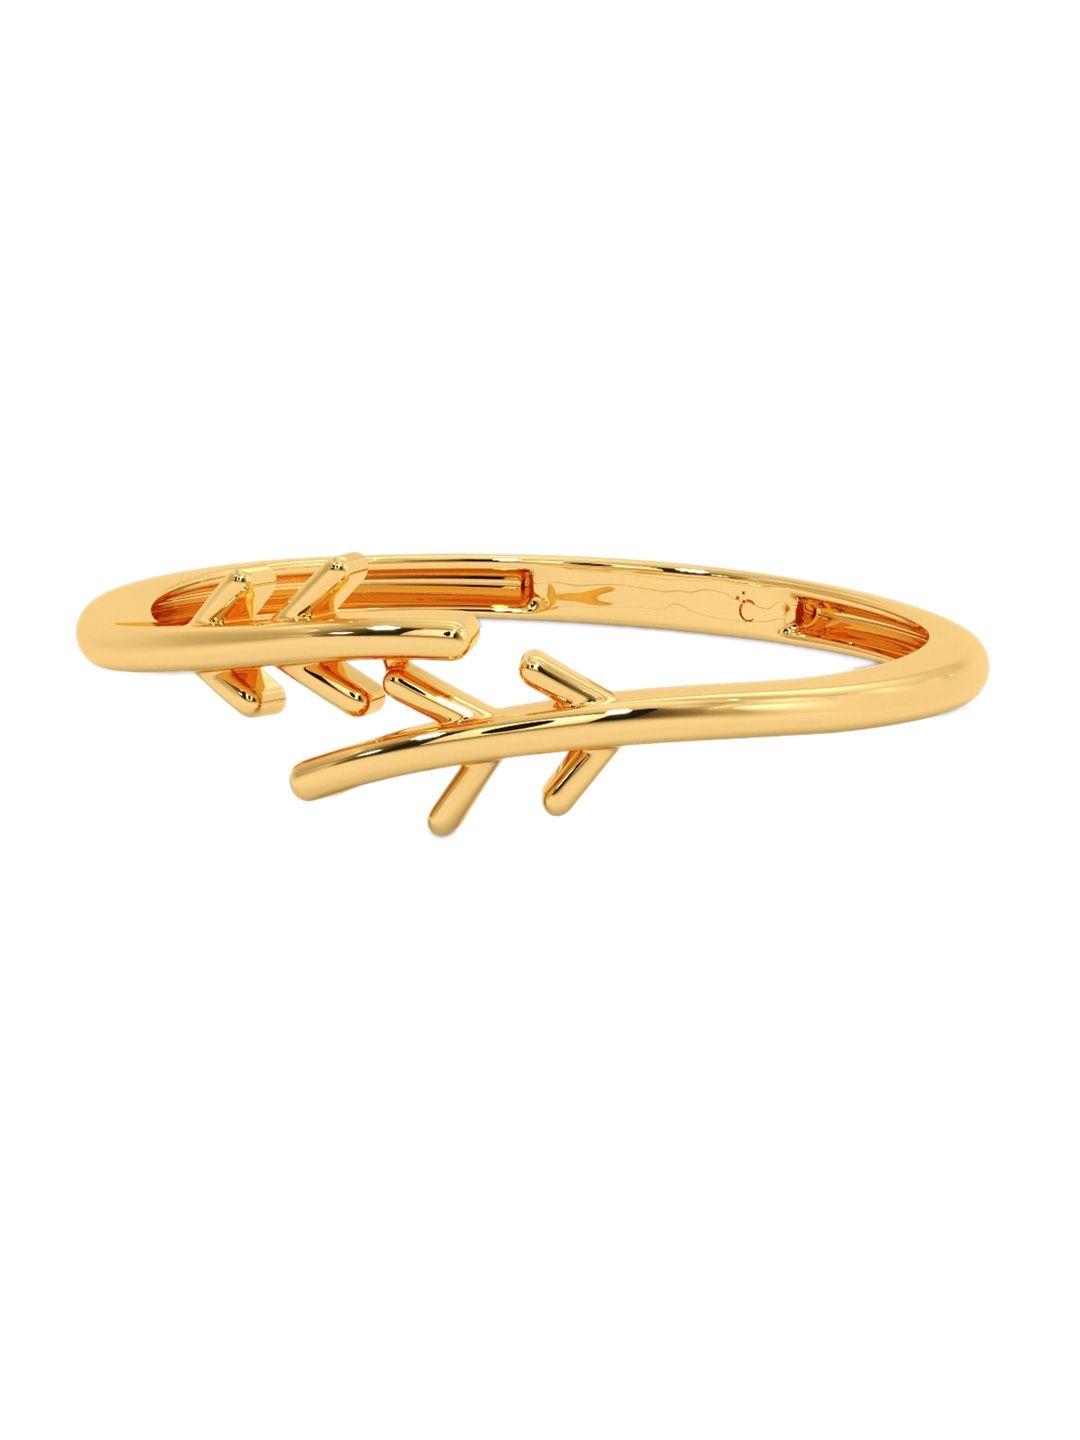 candere-a-kalyan-jewellers-company-18kt-gold-ring-0.77gm